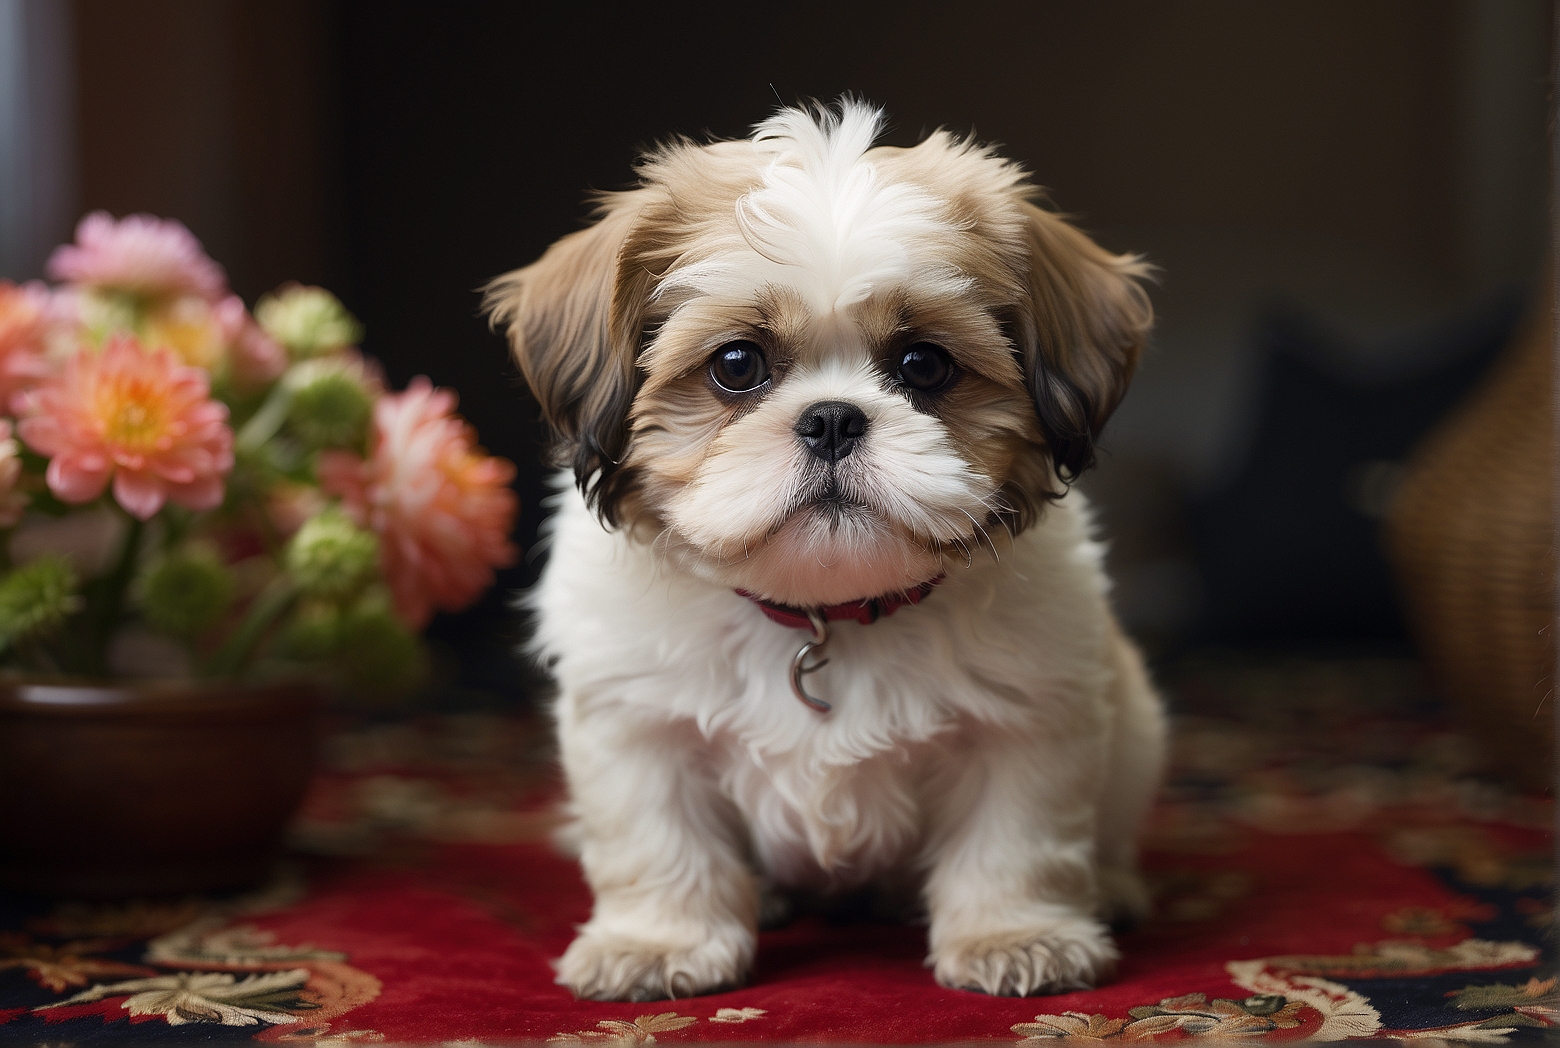 How Much Does a Shih Tzu Dog Cost?